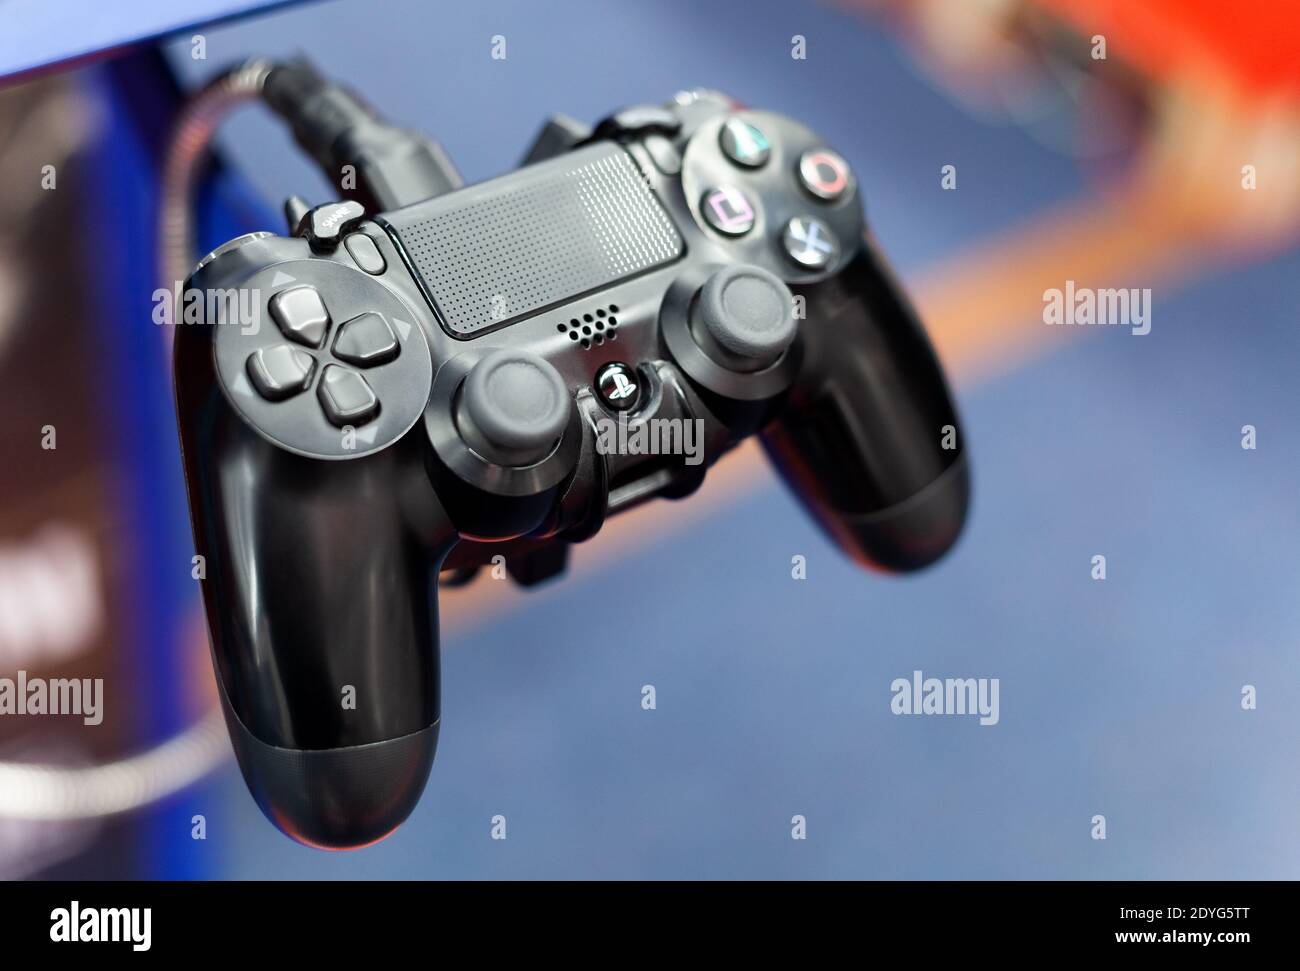 Ps4 Controller High Resolution Stock Photography and Images - Alamy